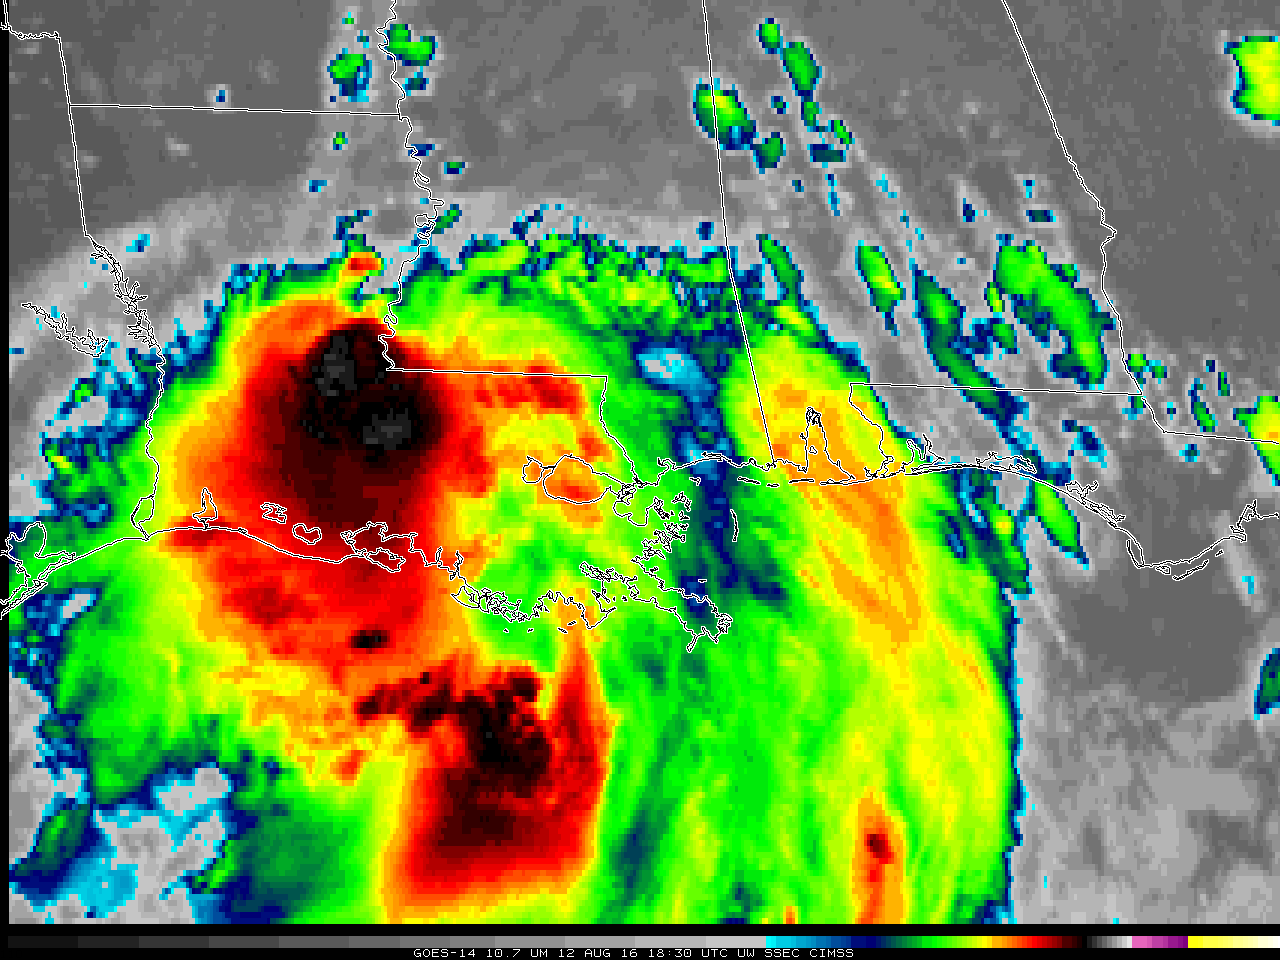 GOES-14 Infrared Window (10.7 µm) Imagery, 1625-1830 UTC on 12 August 2016 [click to play animation]